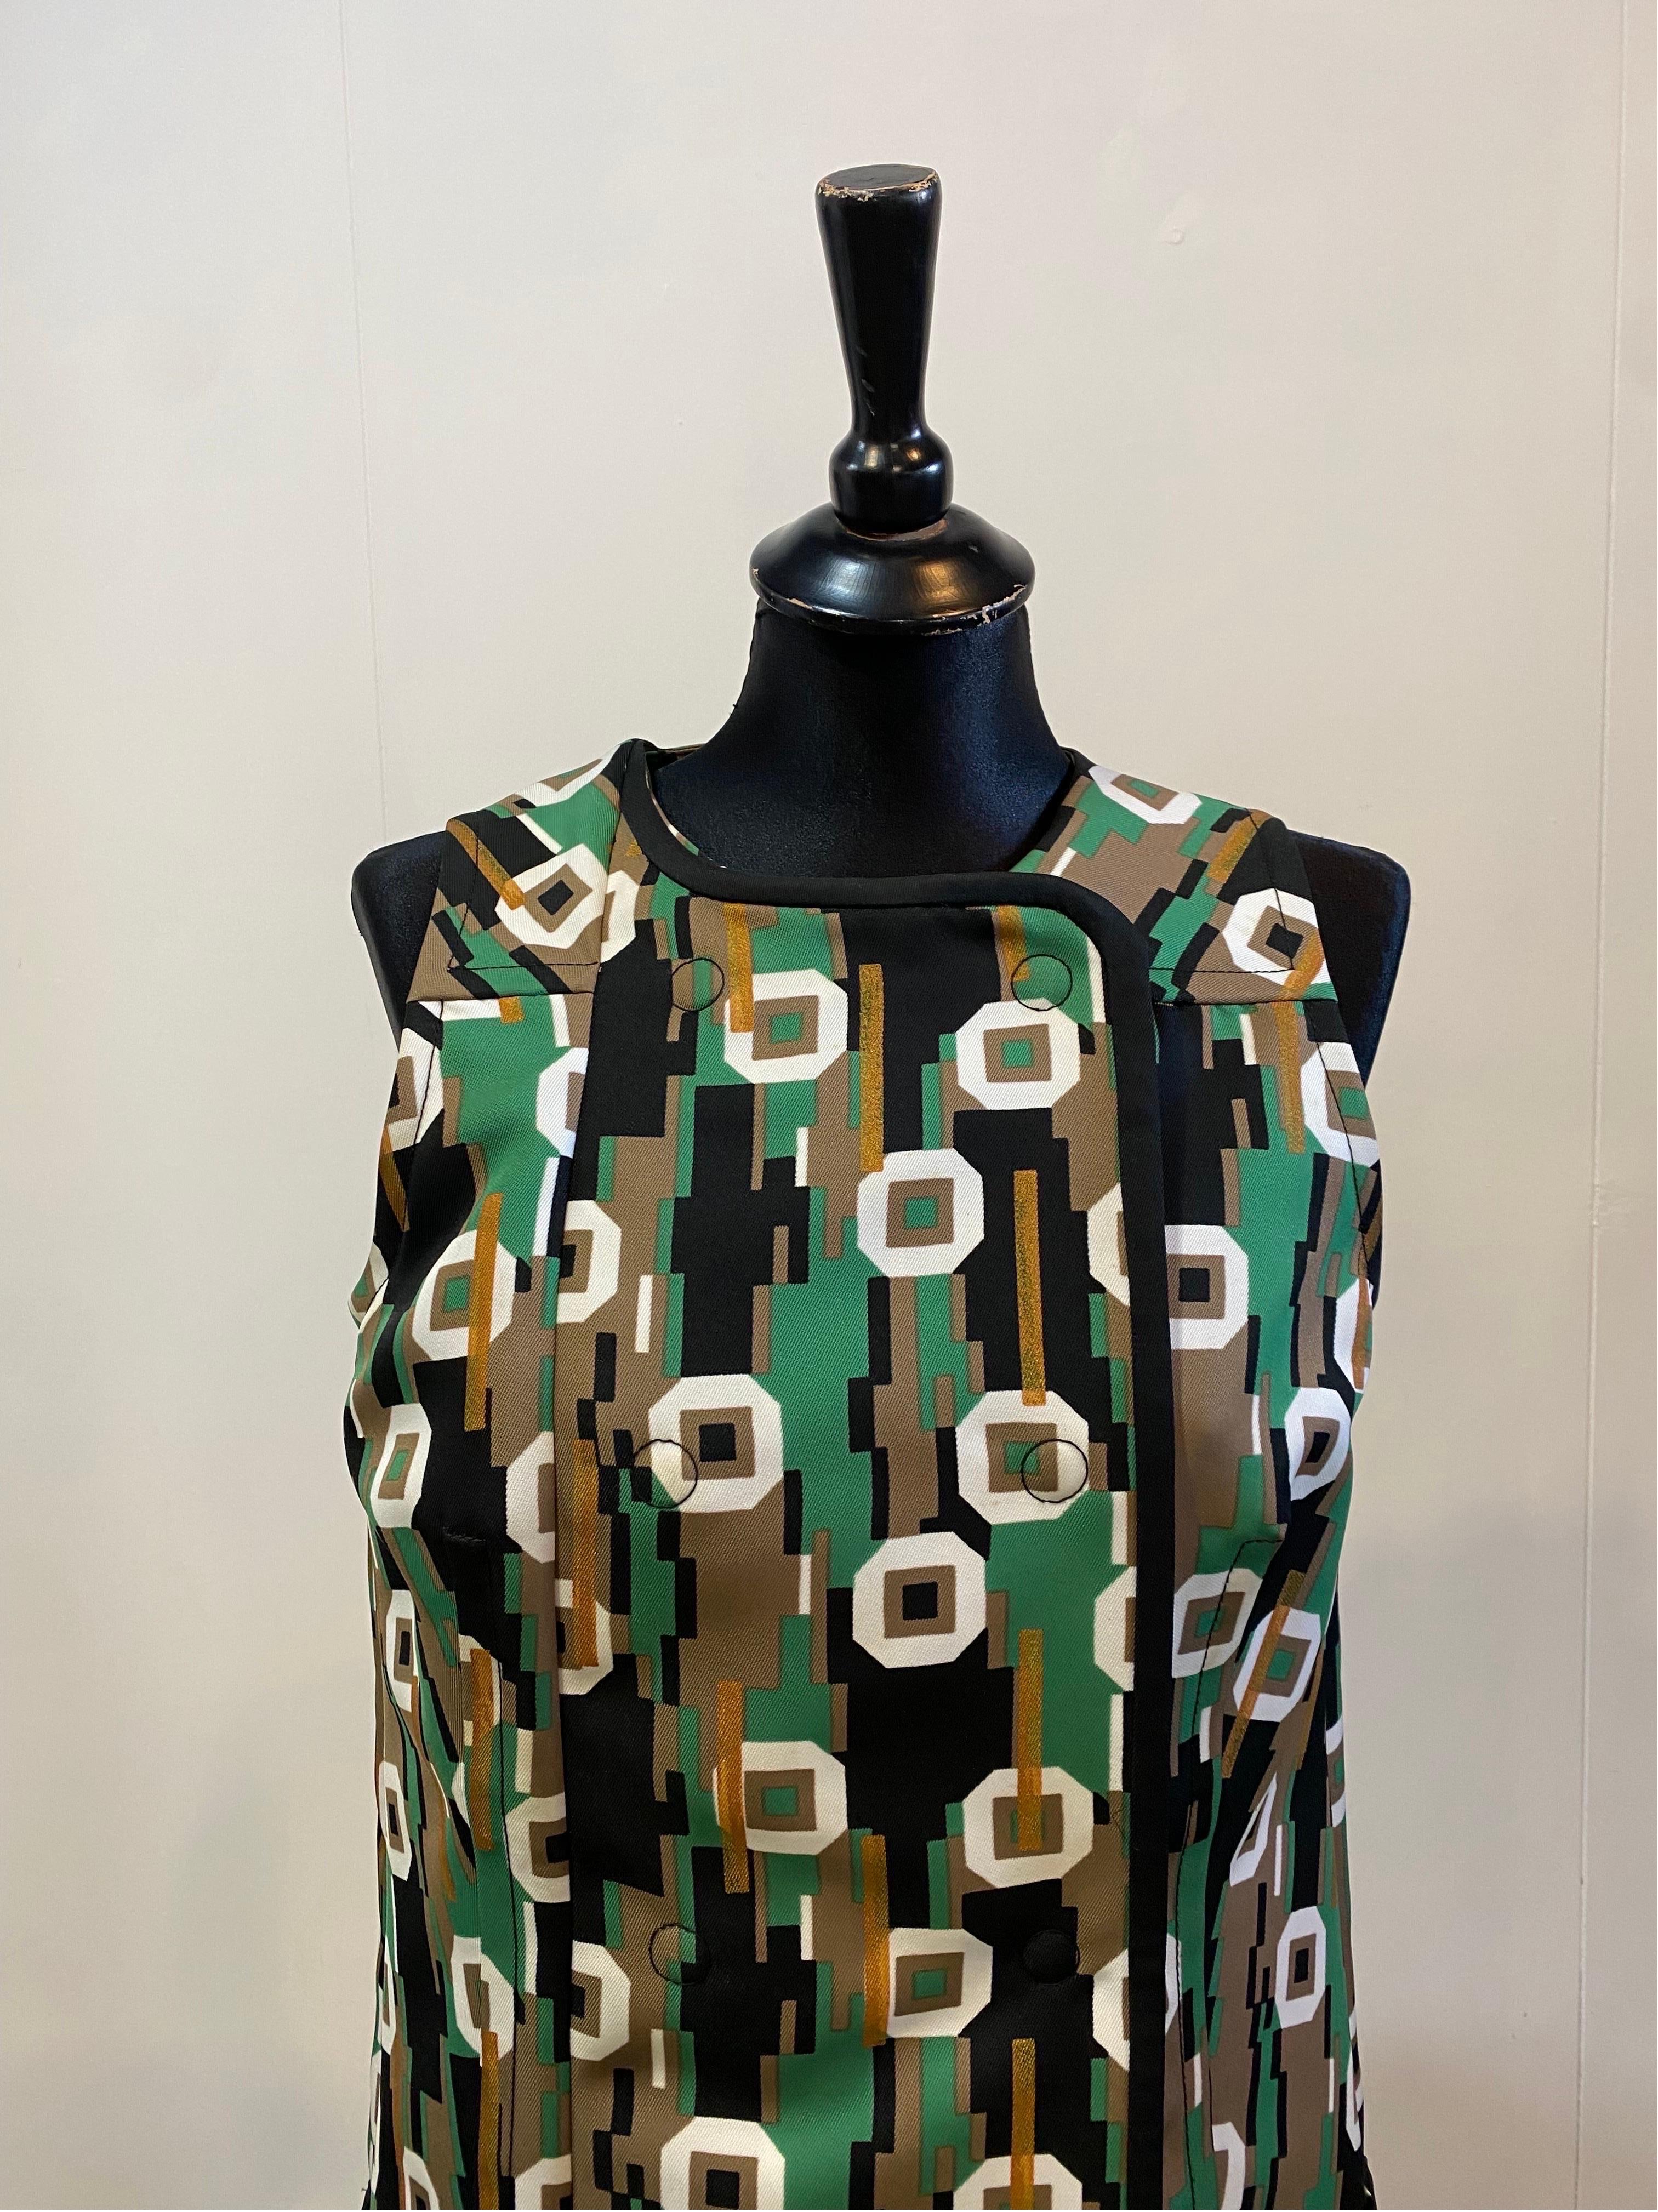 Balenciaga dress.
Resort 2011
Made of polyester, polyamide, elastane.
Very beautiful pattern, 1960s.
French size 40 which corresponds to an Italian 44.
Bust 45 cm
Length 80 cm
Good general condition, shows signs of normal use.